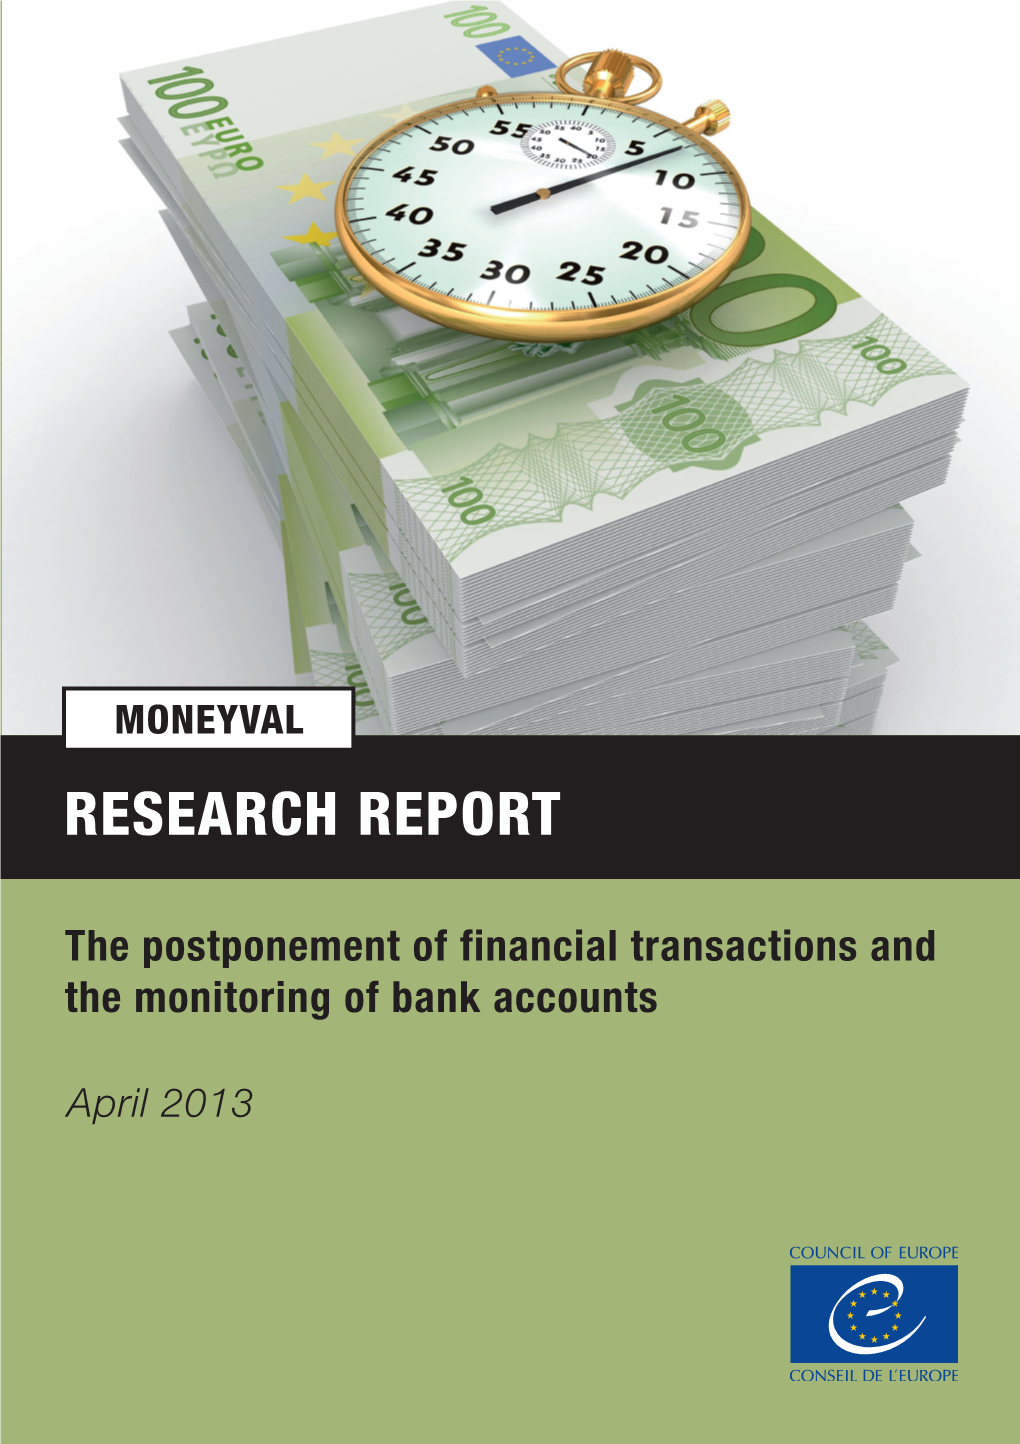 Research Report on the Postponement of Financial Transactions And